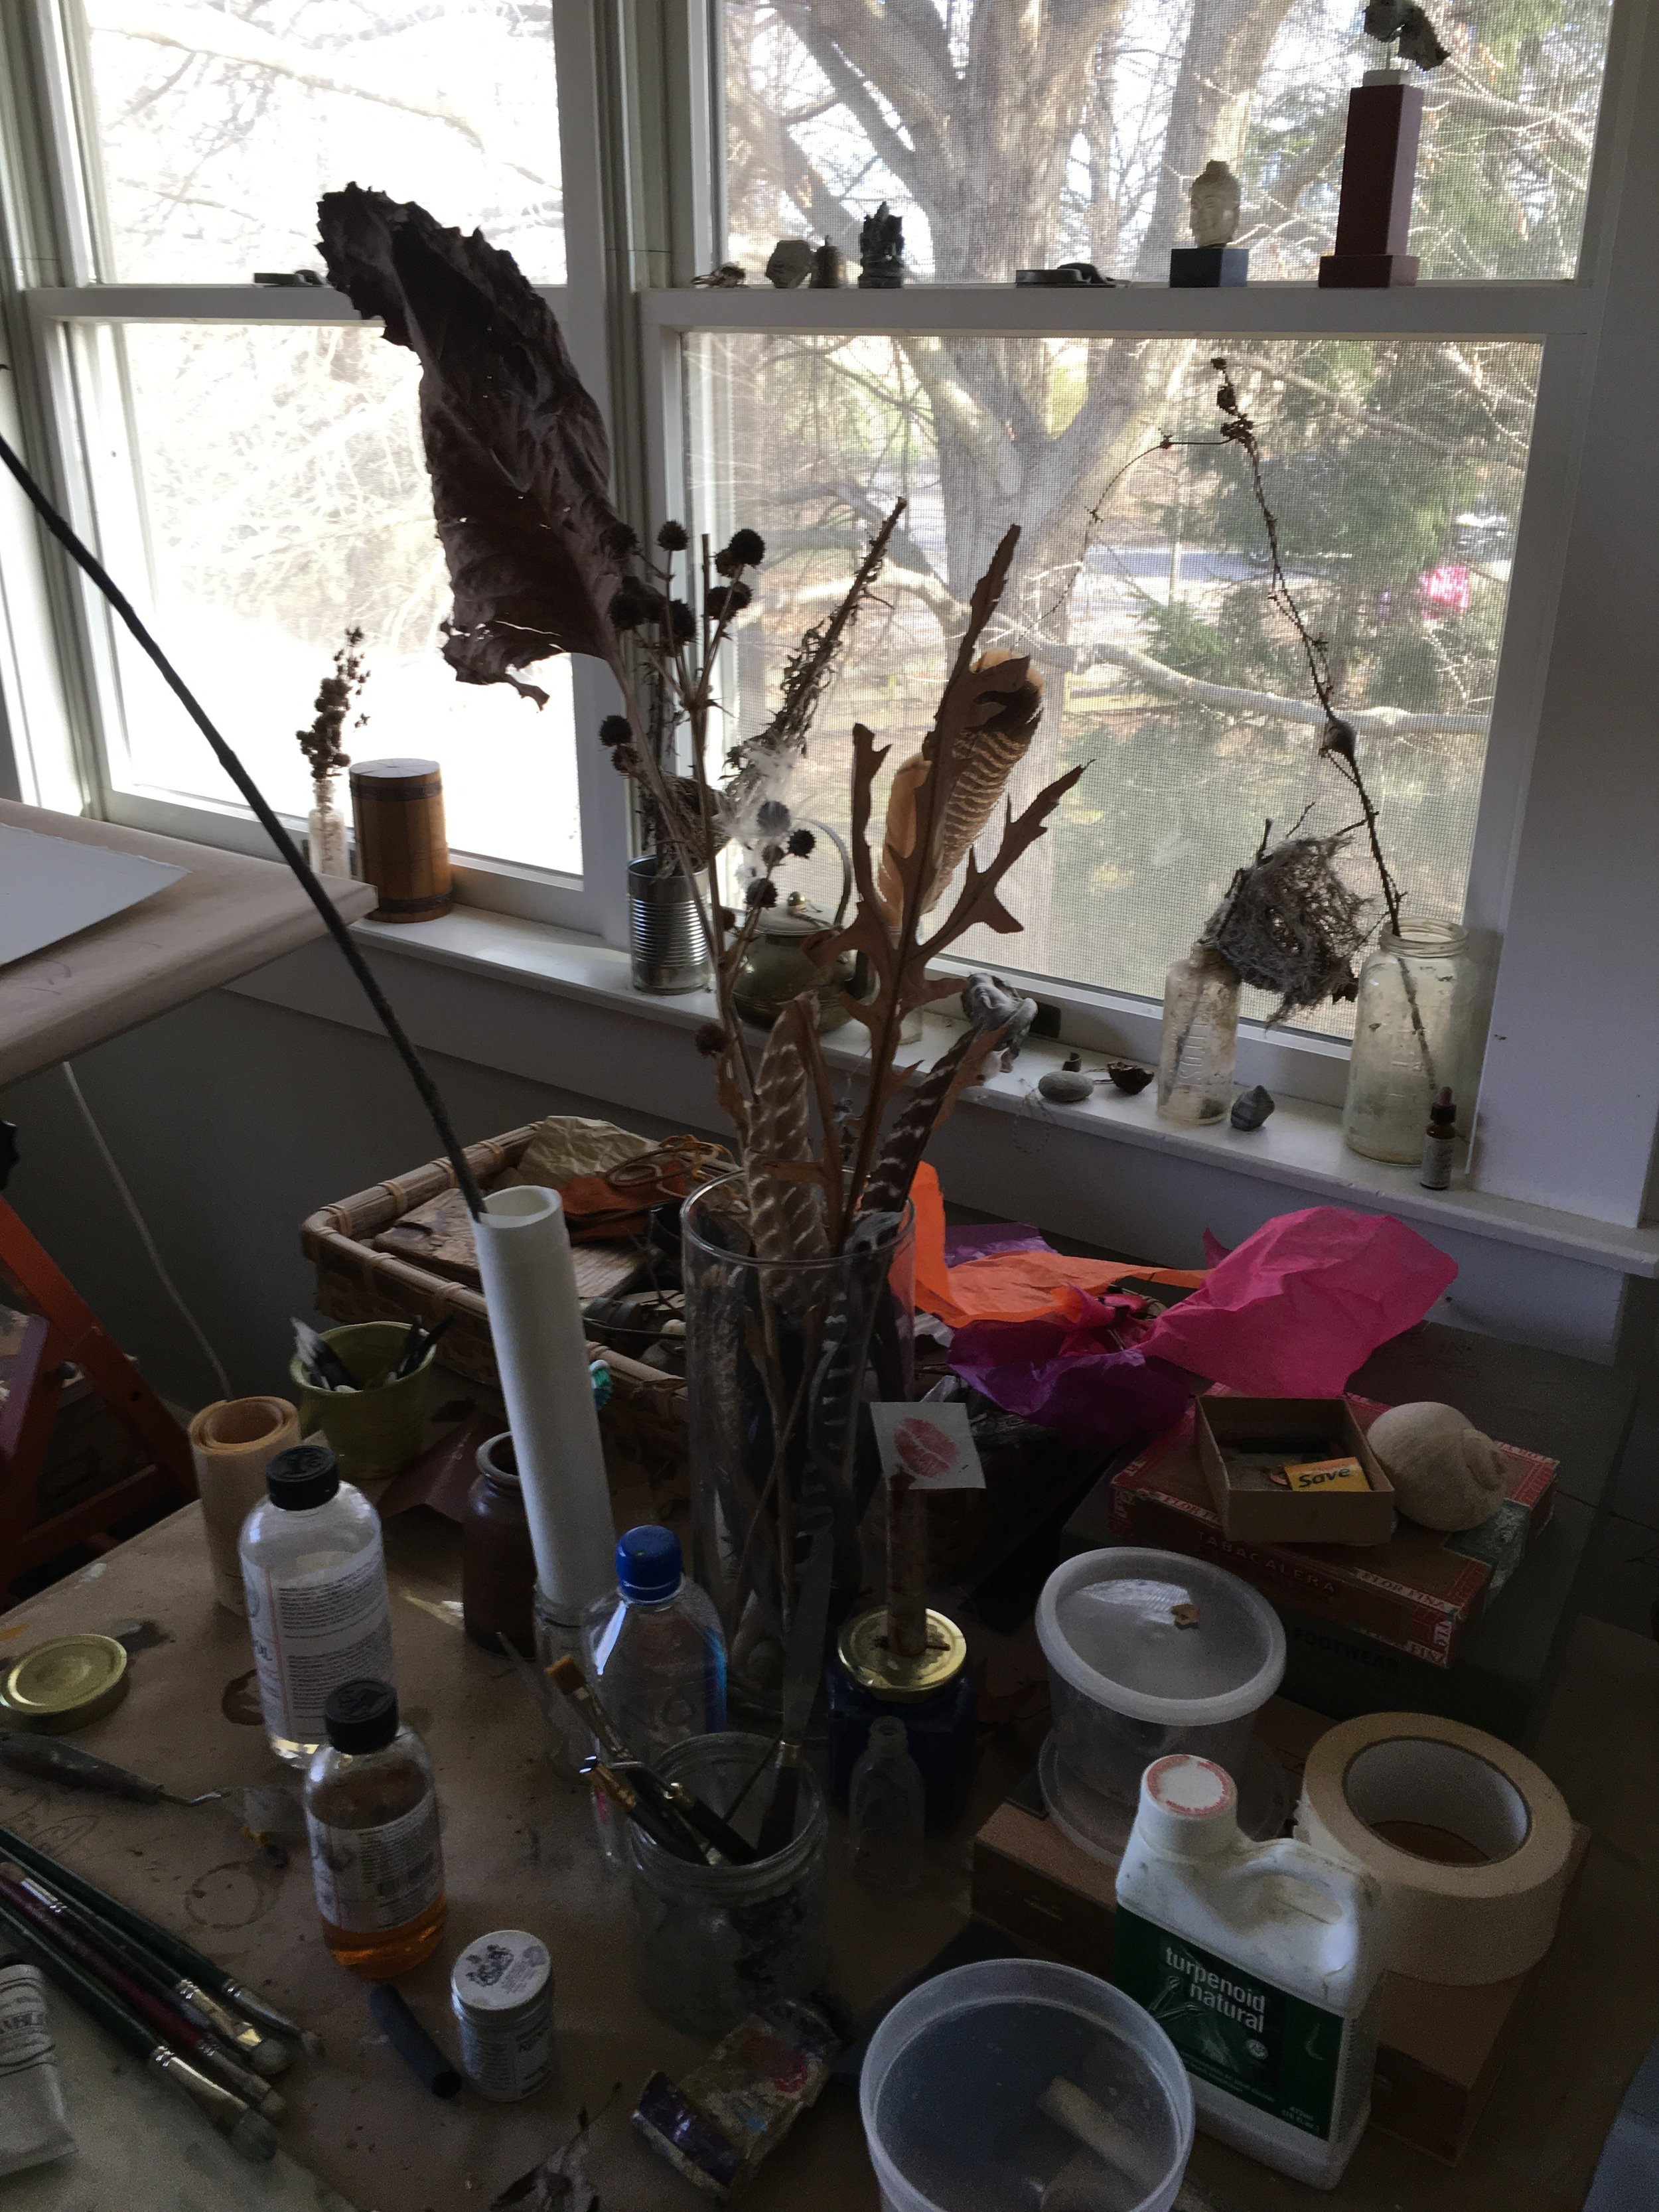  A collection of natural artifacts and artist supplies in Thomas Joseph’s studio in New Brunswick, Canada. 